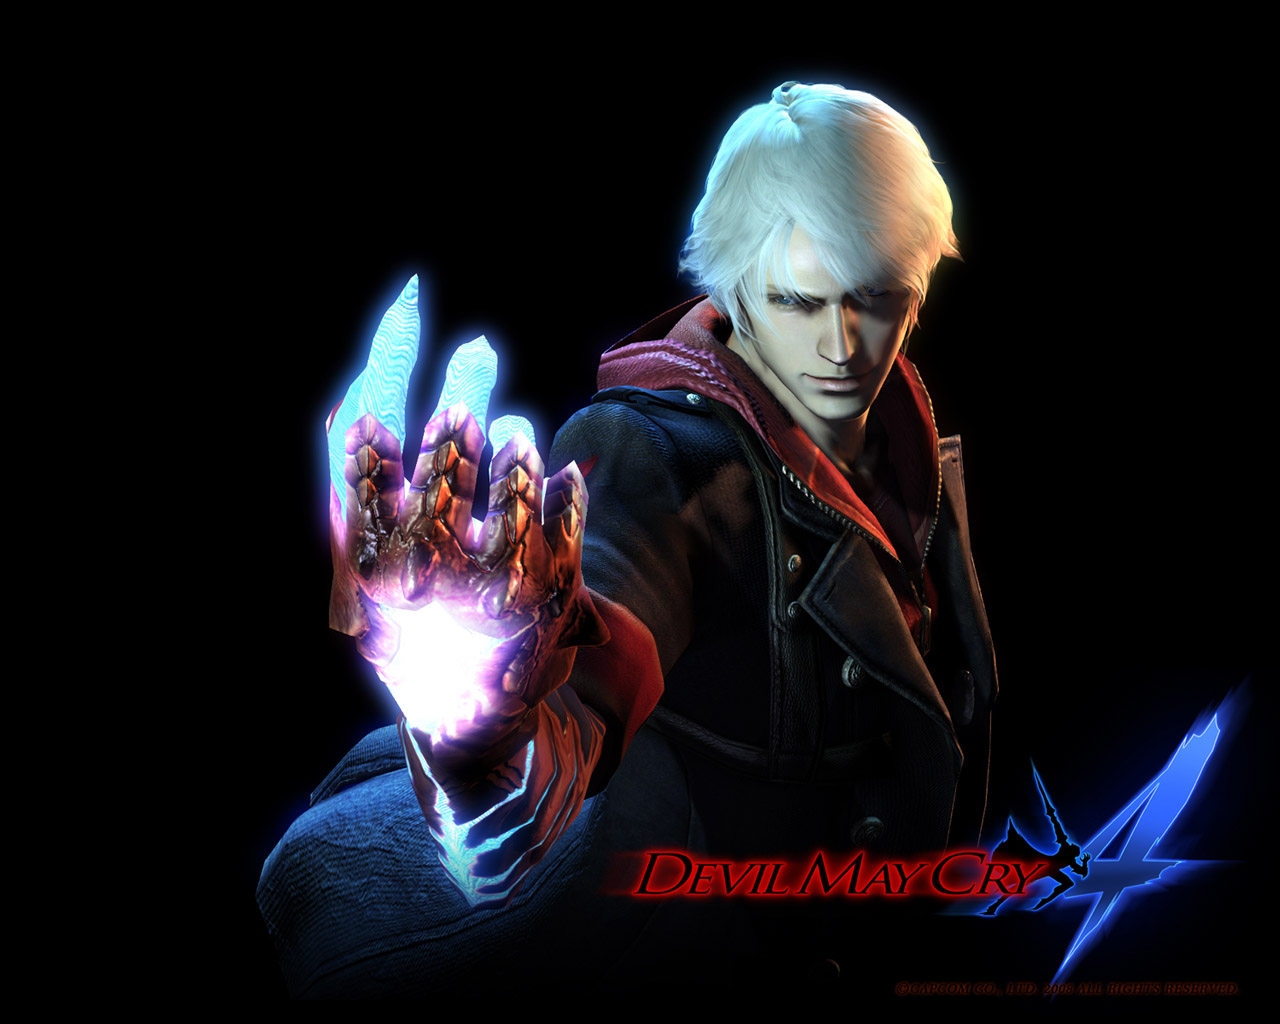 Wallpapers Devil May Cry Devil May Cry 3 Dante Games Image #109900 ...